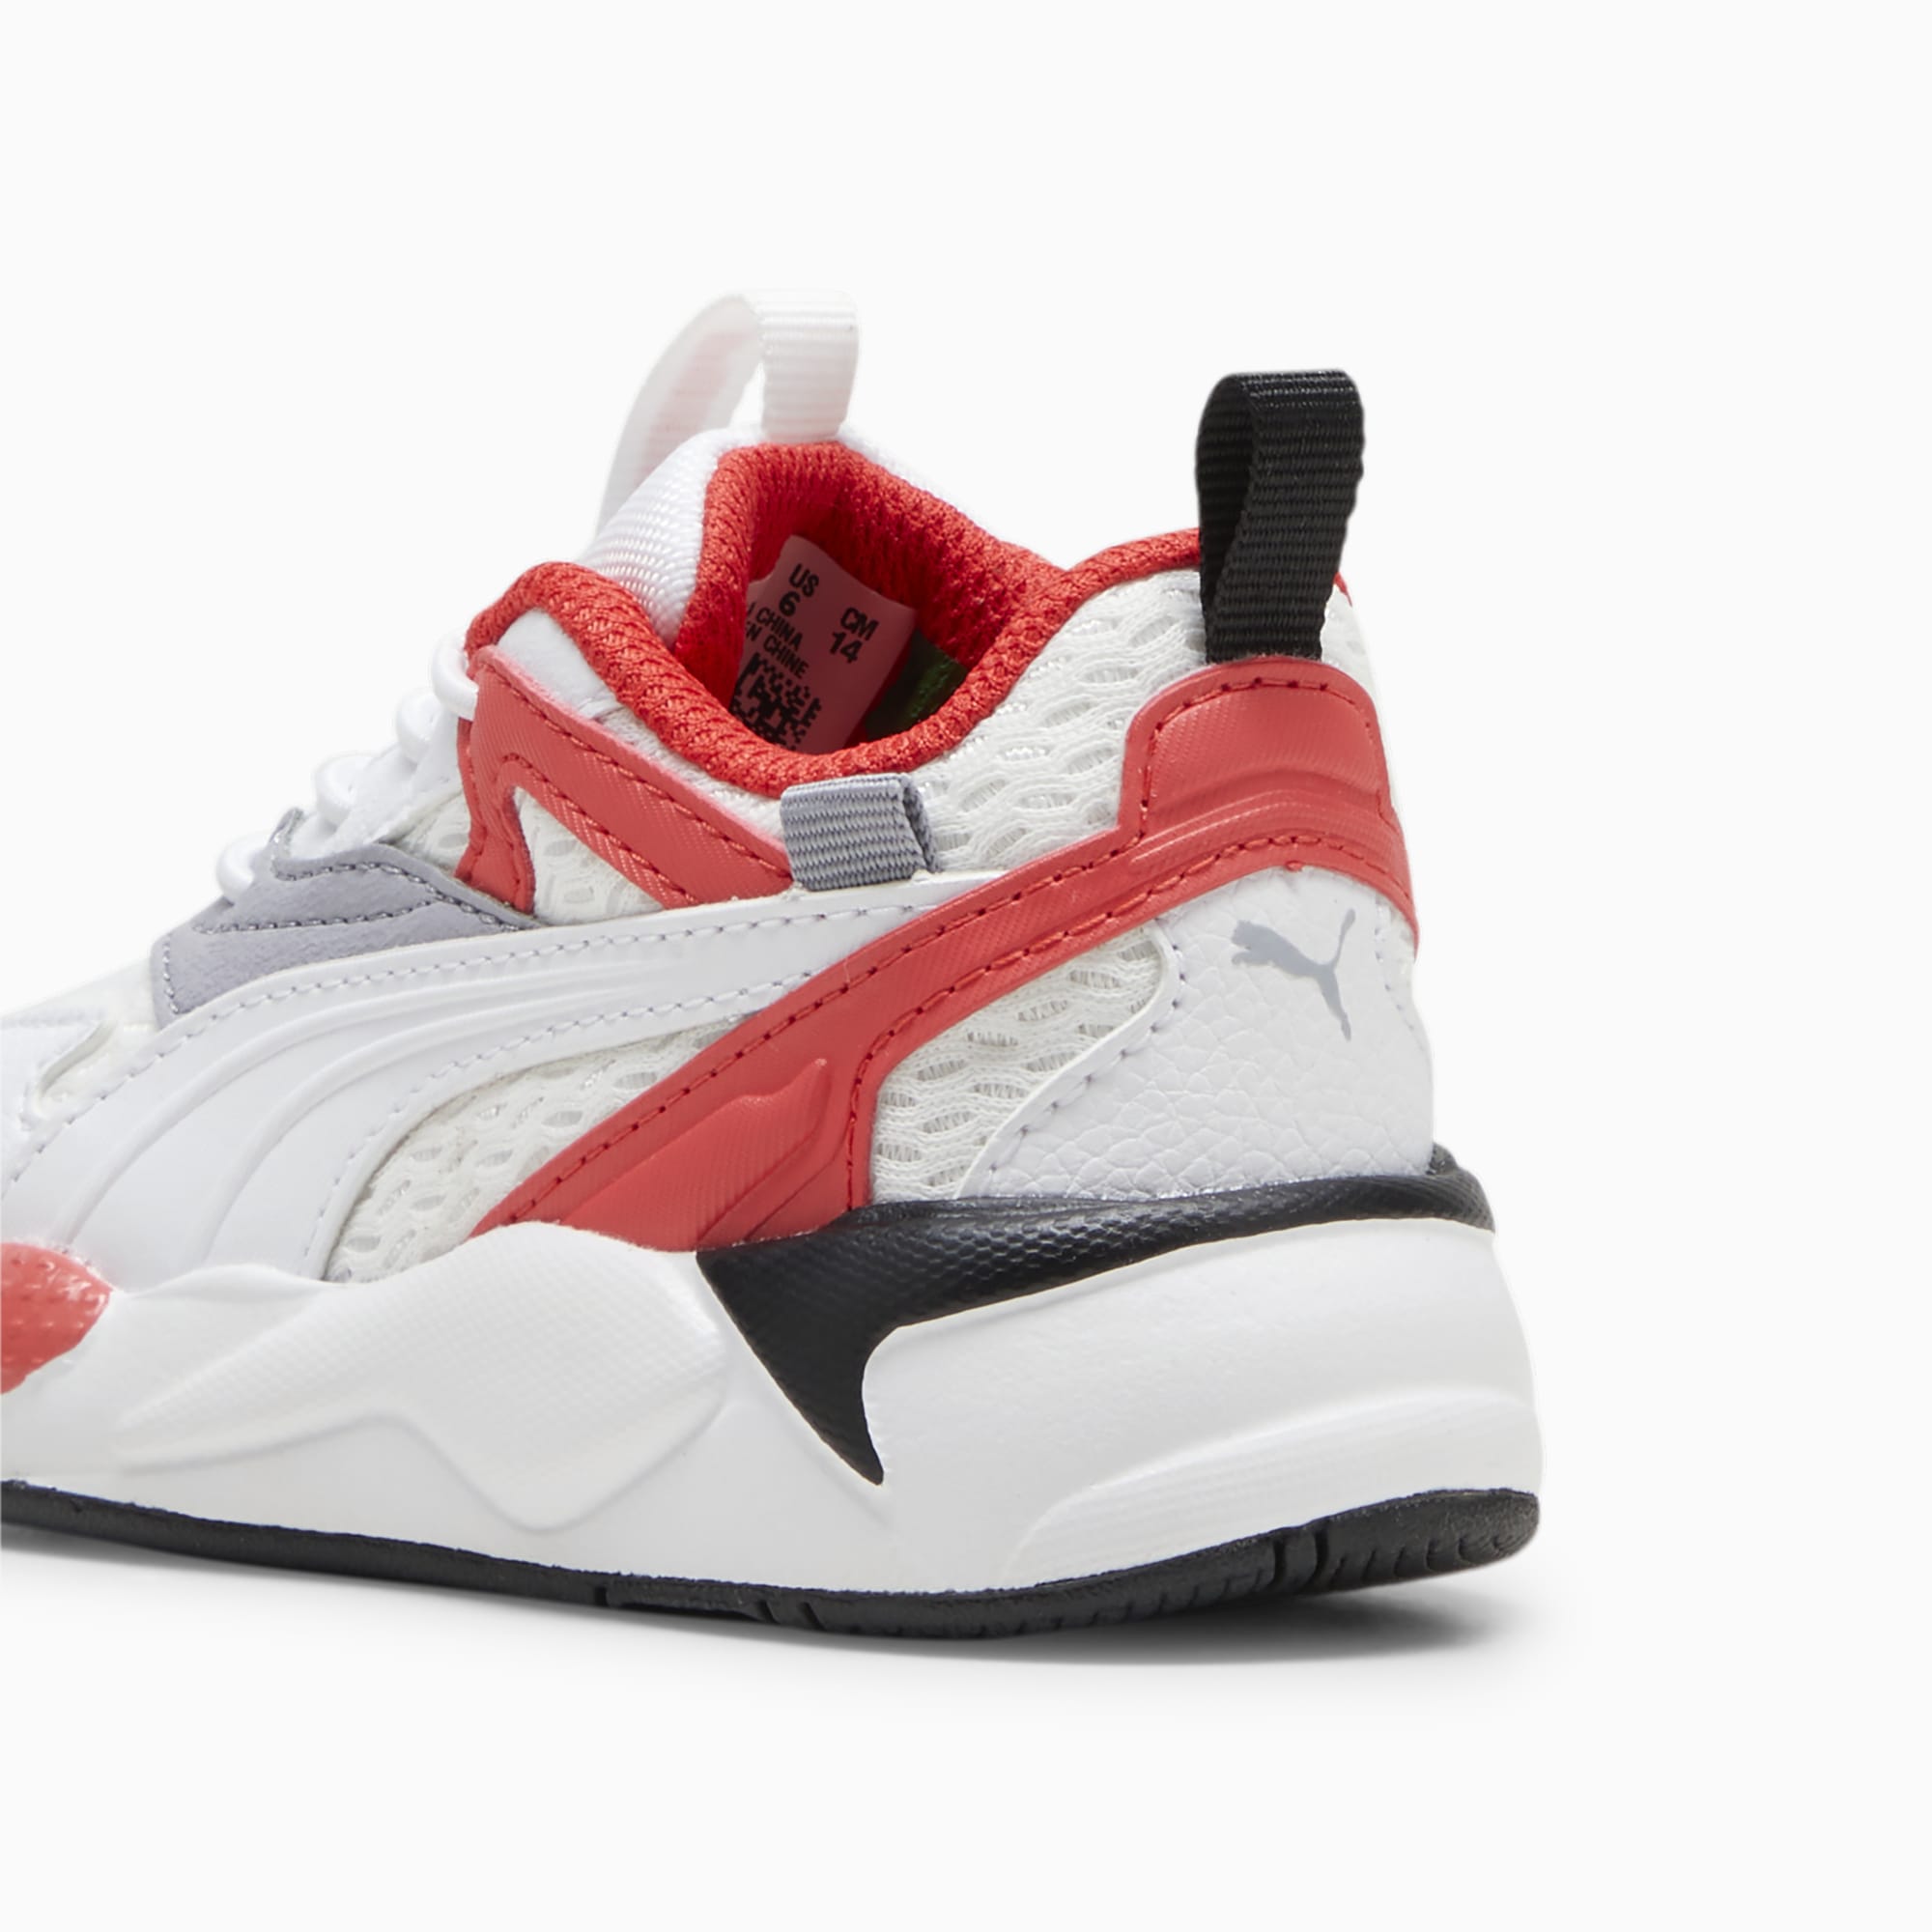 PUMA Rs-X Efekt Toddlers' Sneakers, White/Active Red, Size 19, Shoes